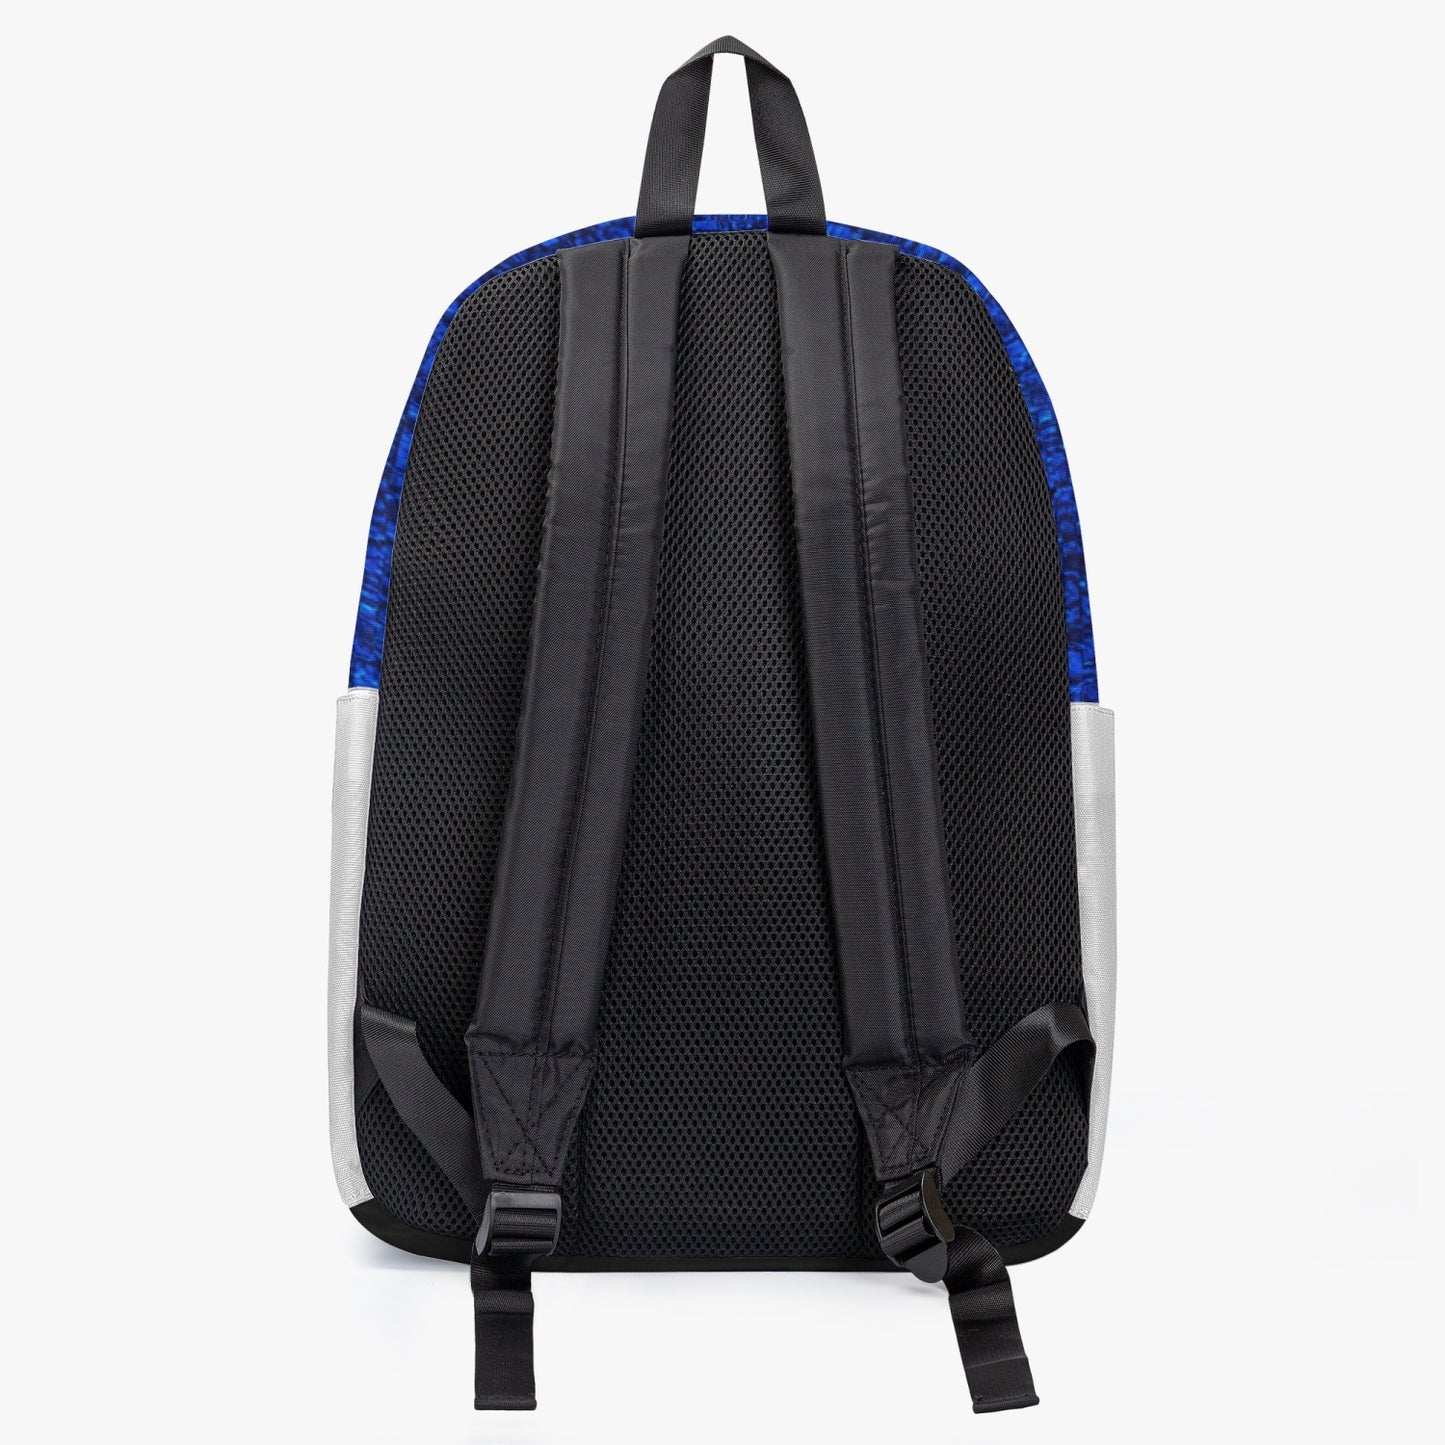 Harlem Boy Collection Backpack - Electric Kiss - Sapphire